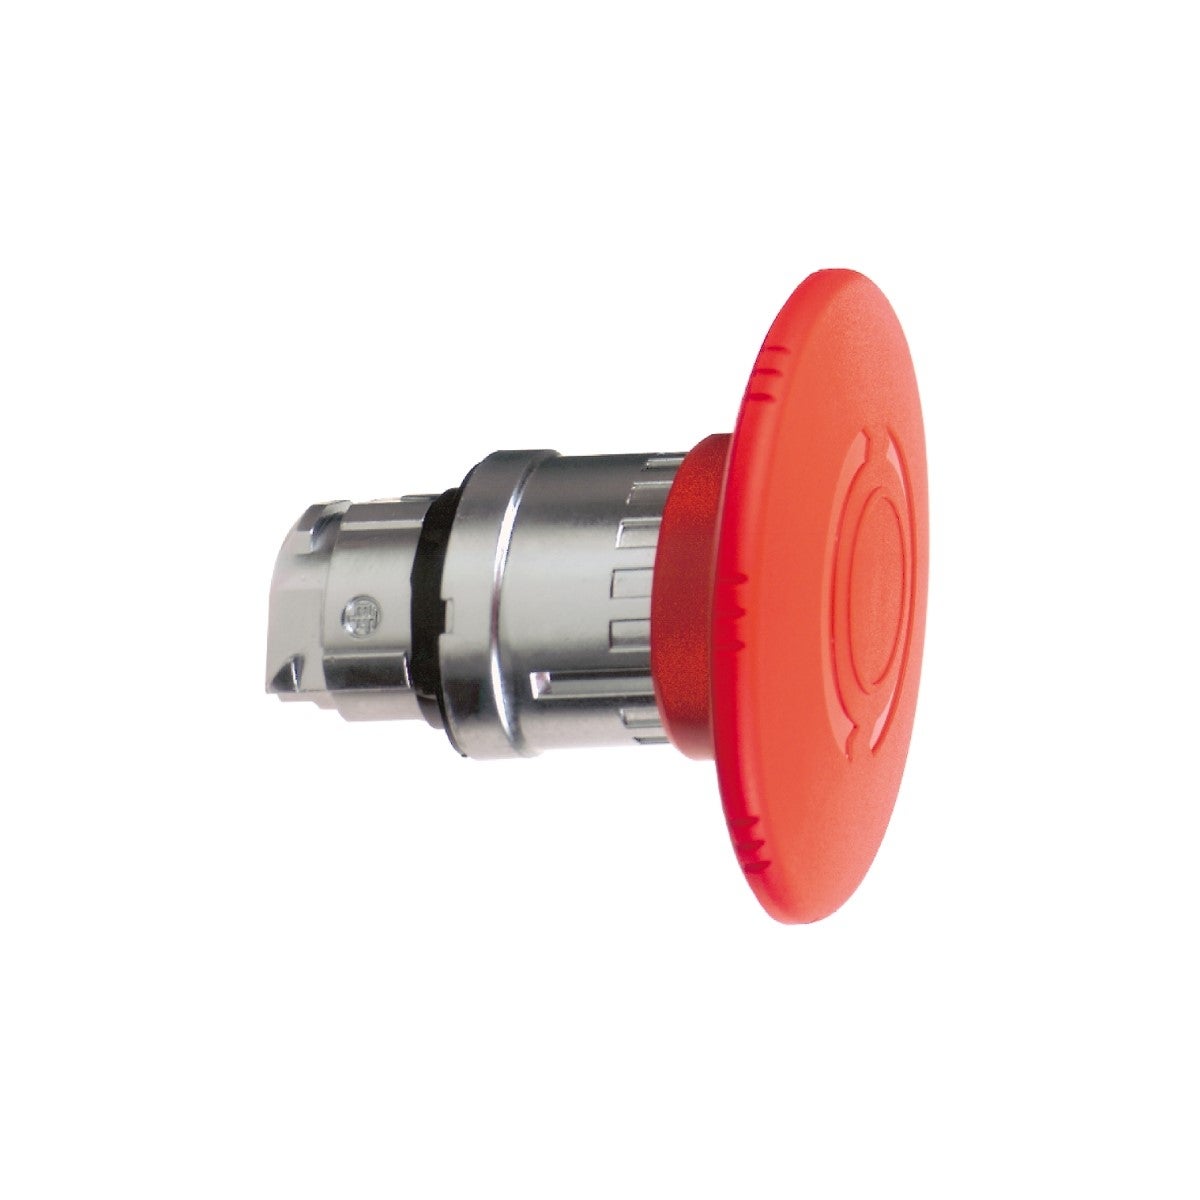 Emergency stop head, Harmony XB4, switching off, metal, red mushroom 60mm, 22mm, trigger latching turn to release